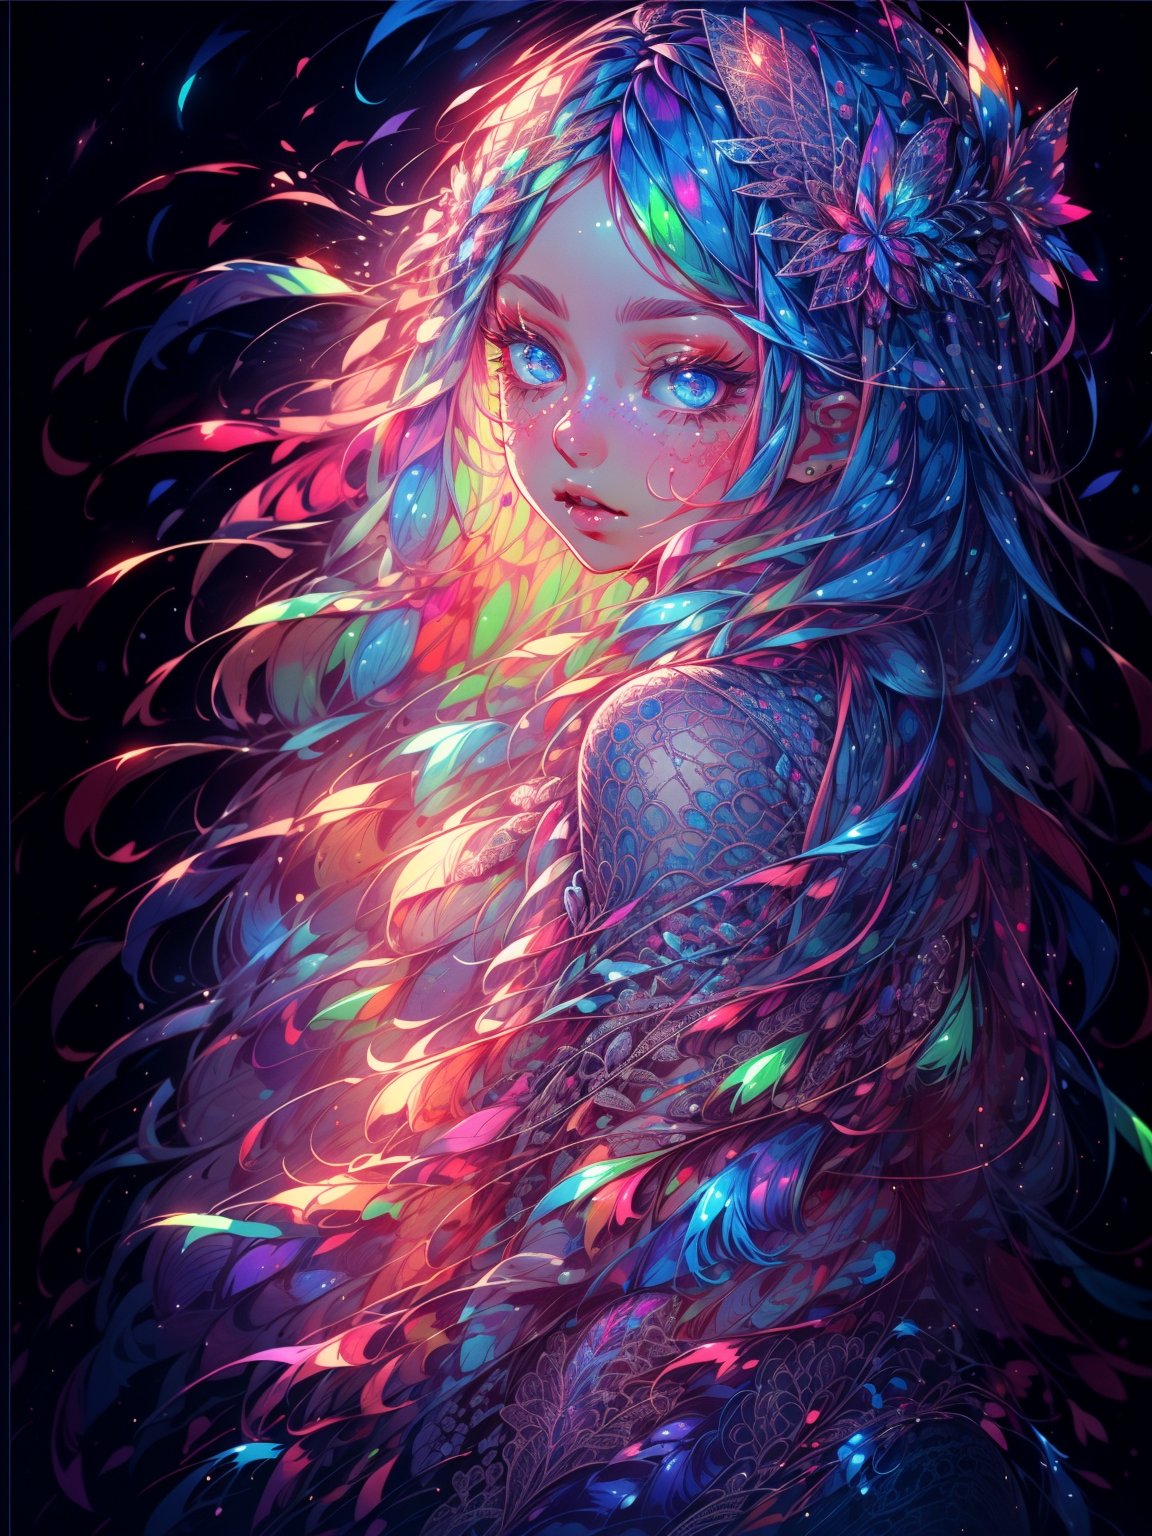 artwork, art representing warmth and security, colorful, extra detailed, professional photography, ornament, intricate details, (((beautiful lady)))), colorfulmix,1 girl, lace, color explosion, multicolor, perfect eyes, perfect face,colorfulmix